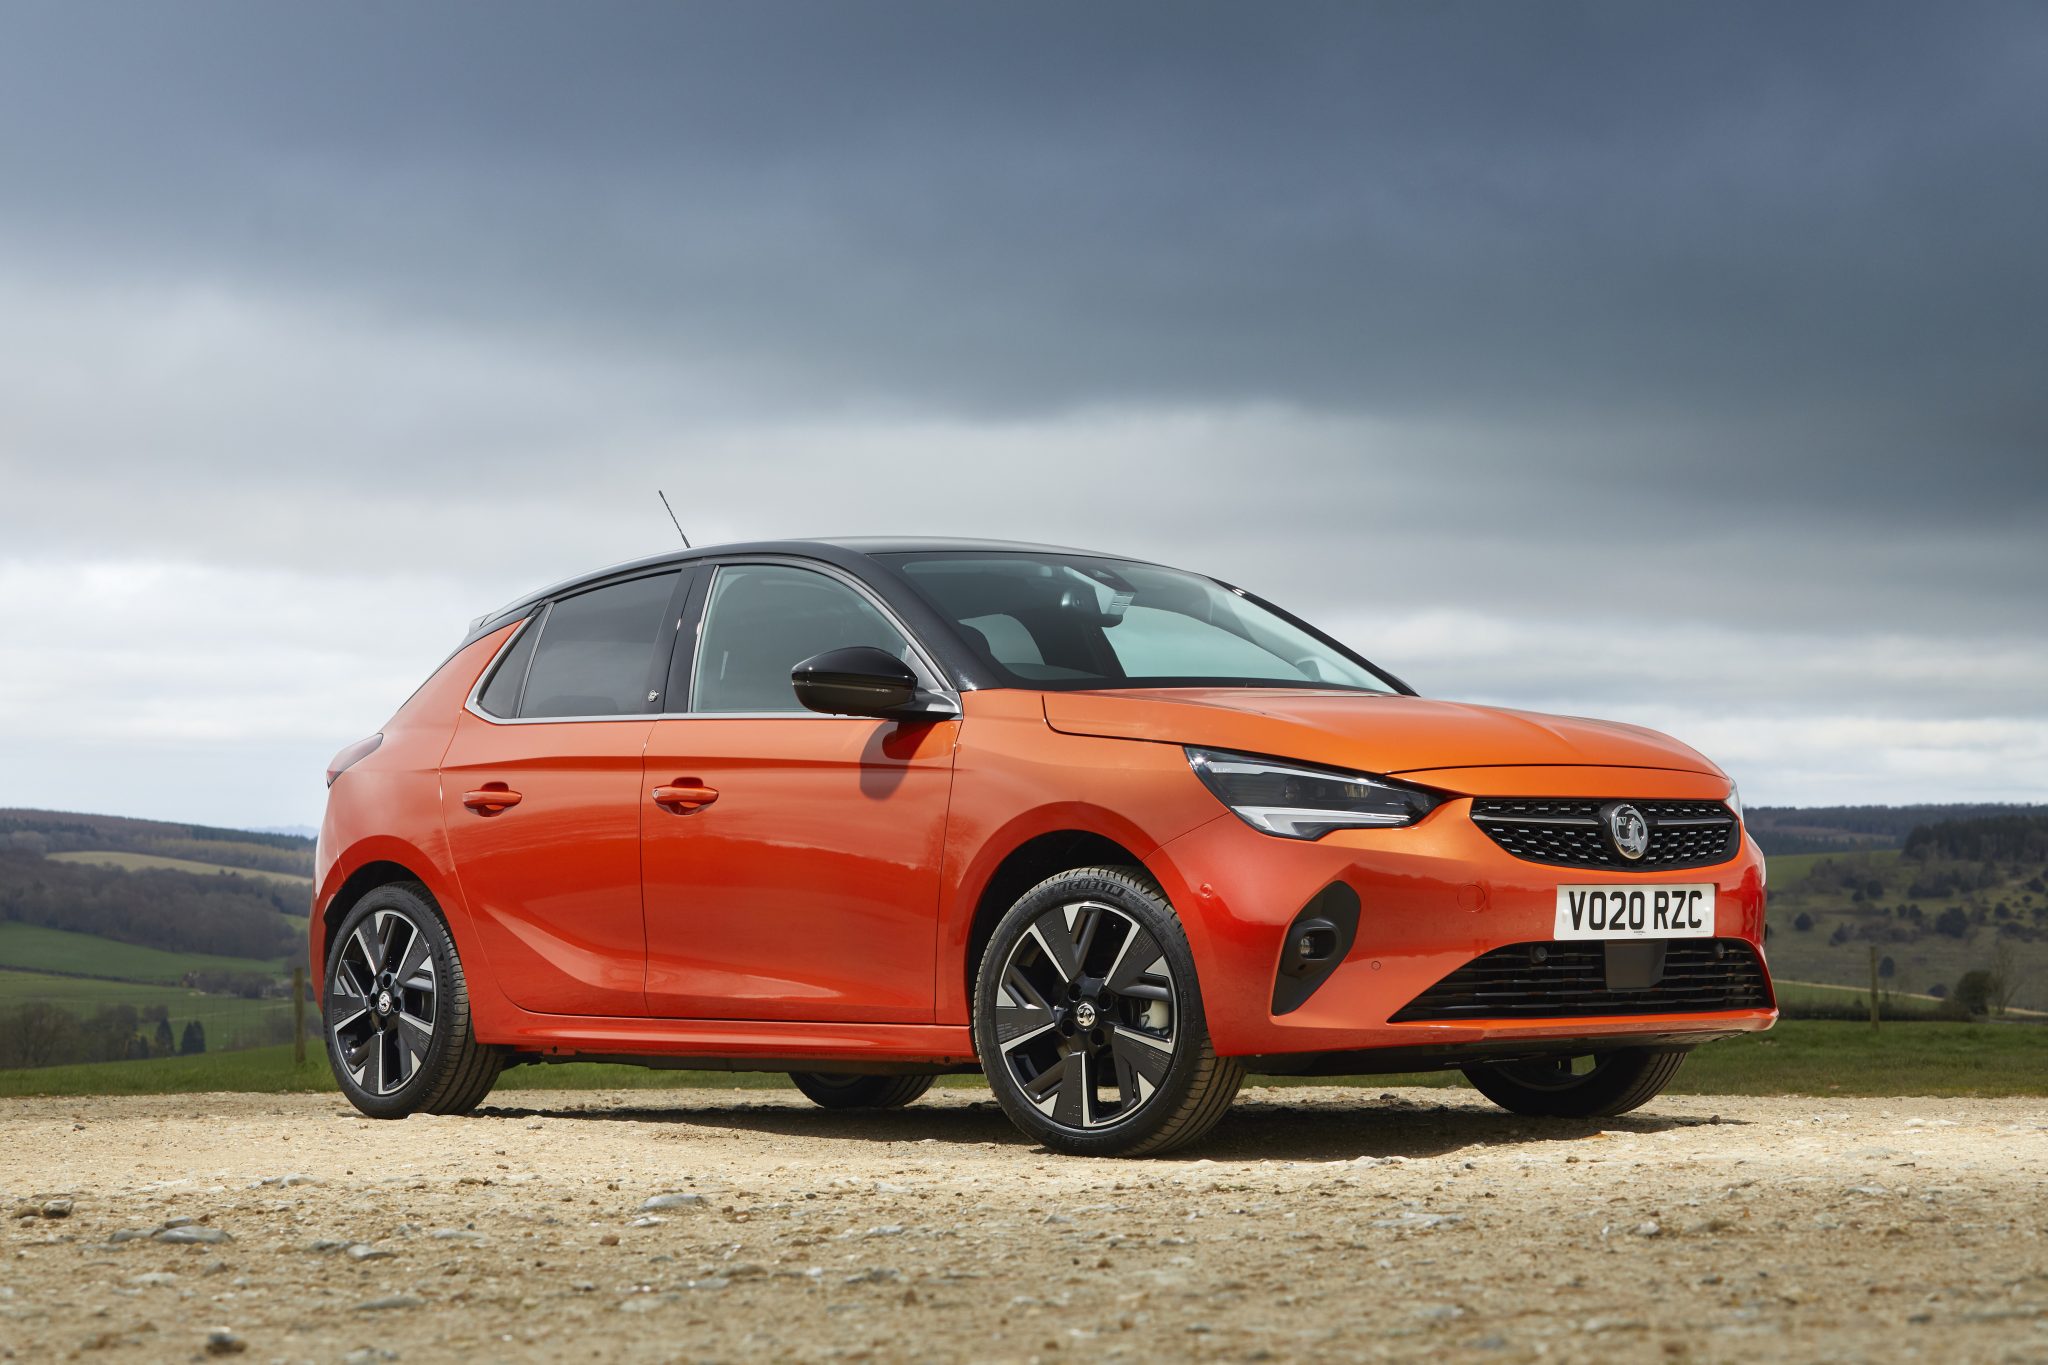 vauxhall-offering-30-000-free-electric-miles-with-corsa-e-deal